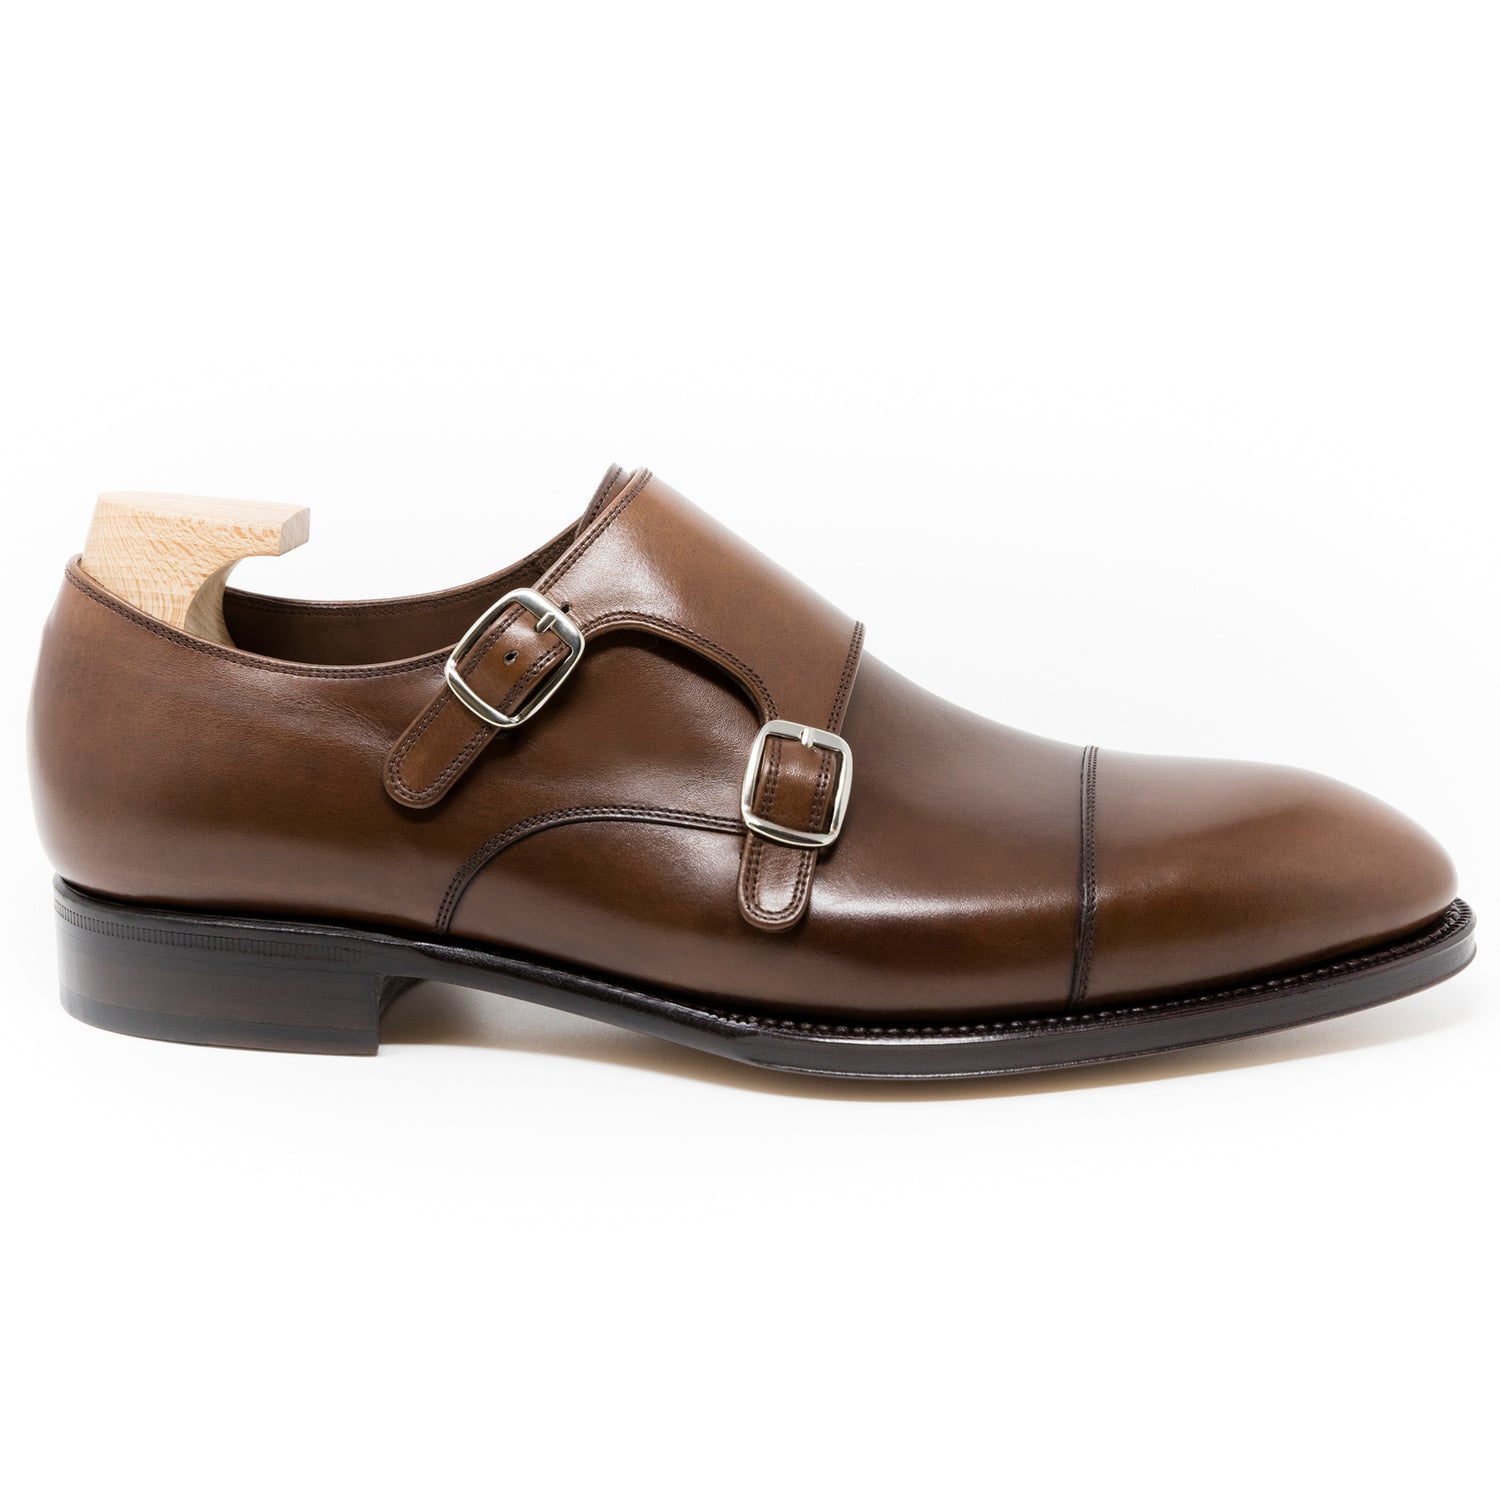 TLB Mallorca leather shoes 517 / OLIVER / VEGANO BROWN